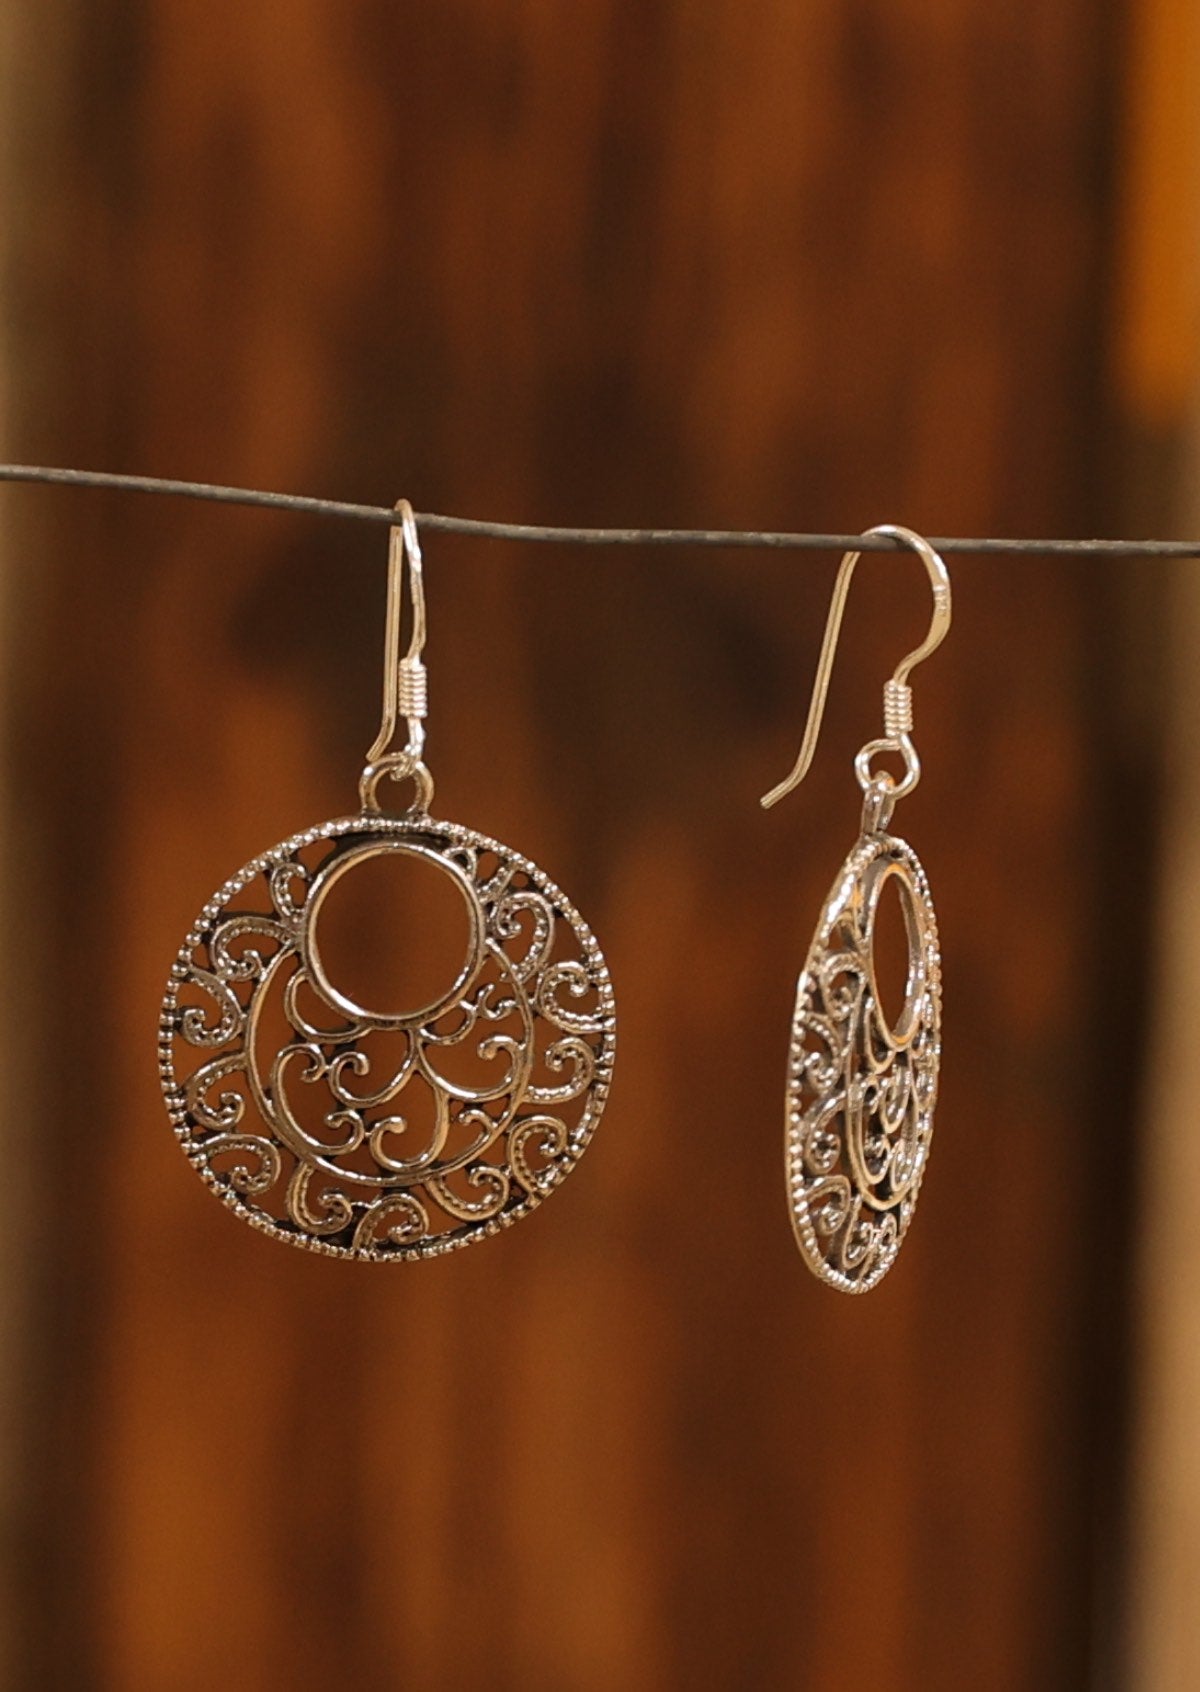 Silver earrings with swirly designs suspended from  hooks